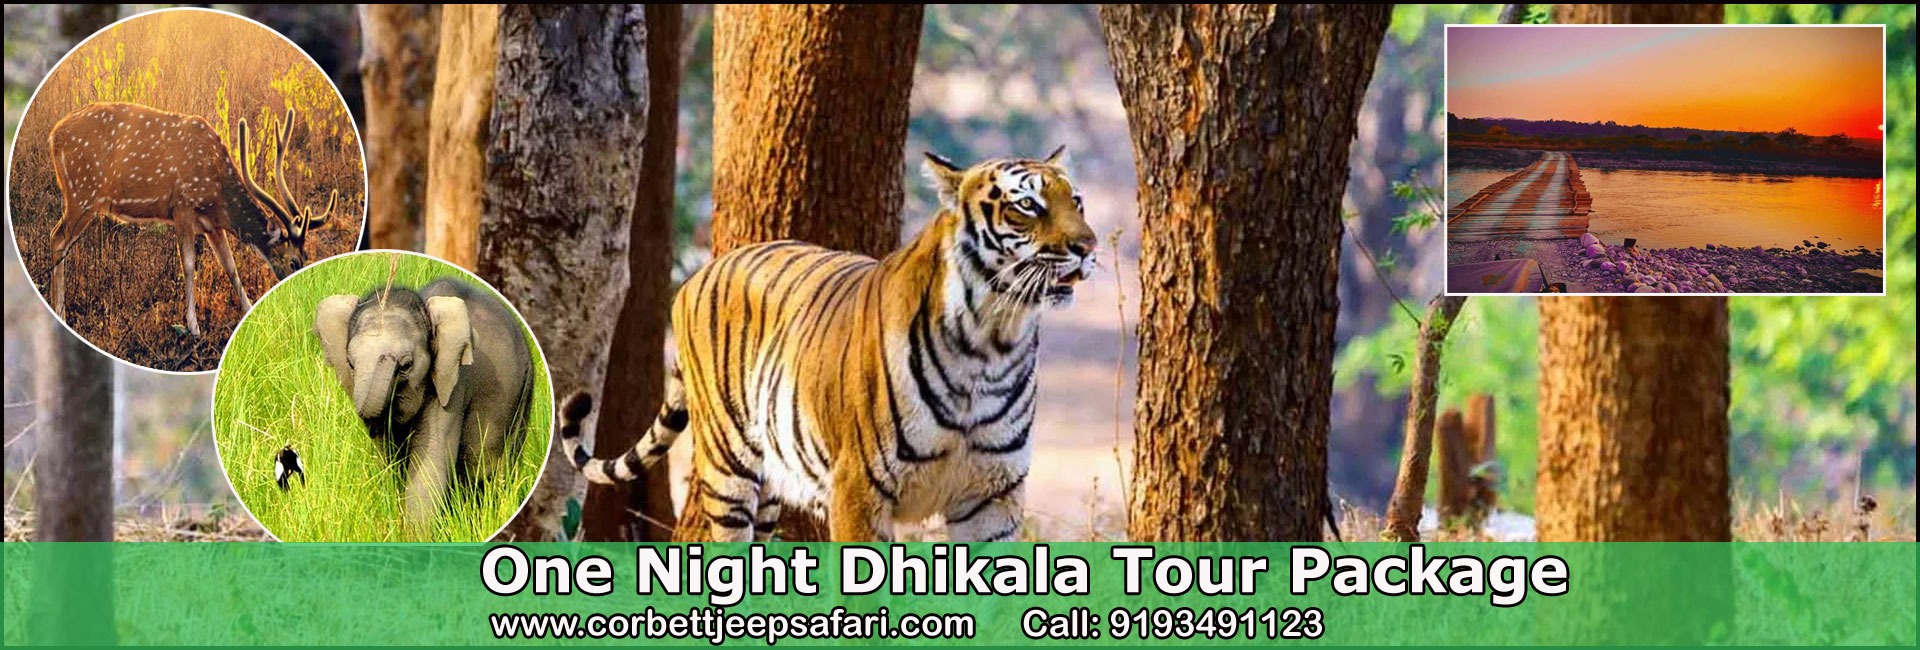 One Night Dhikala Tour Package